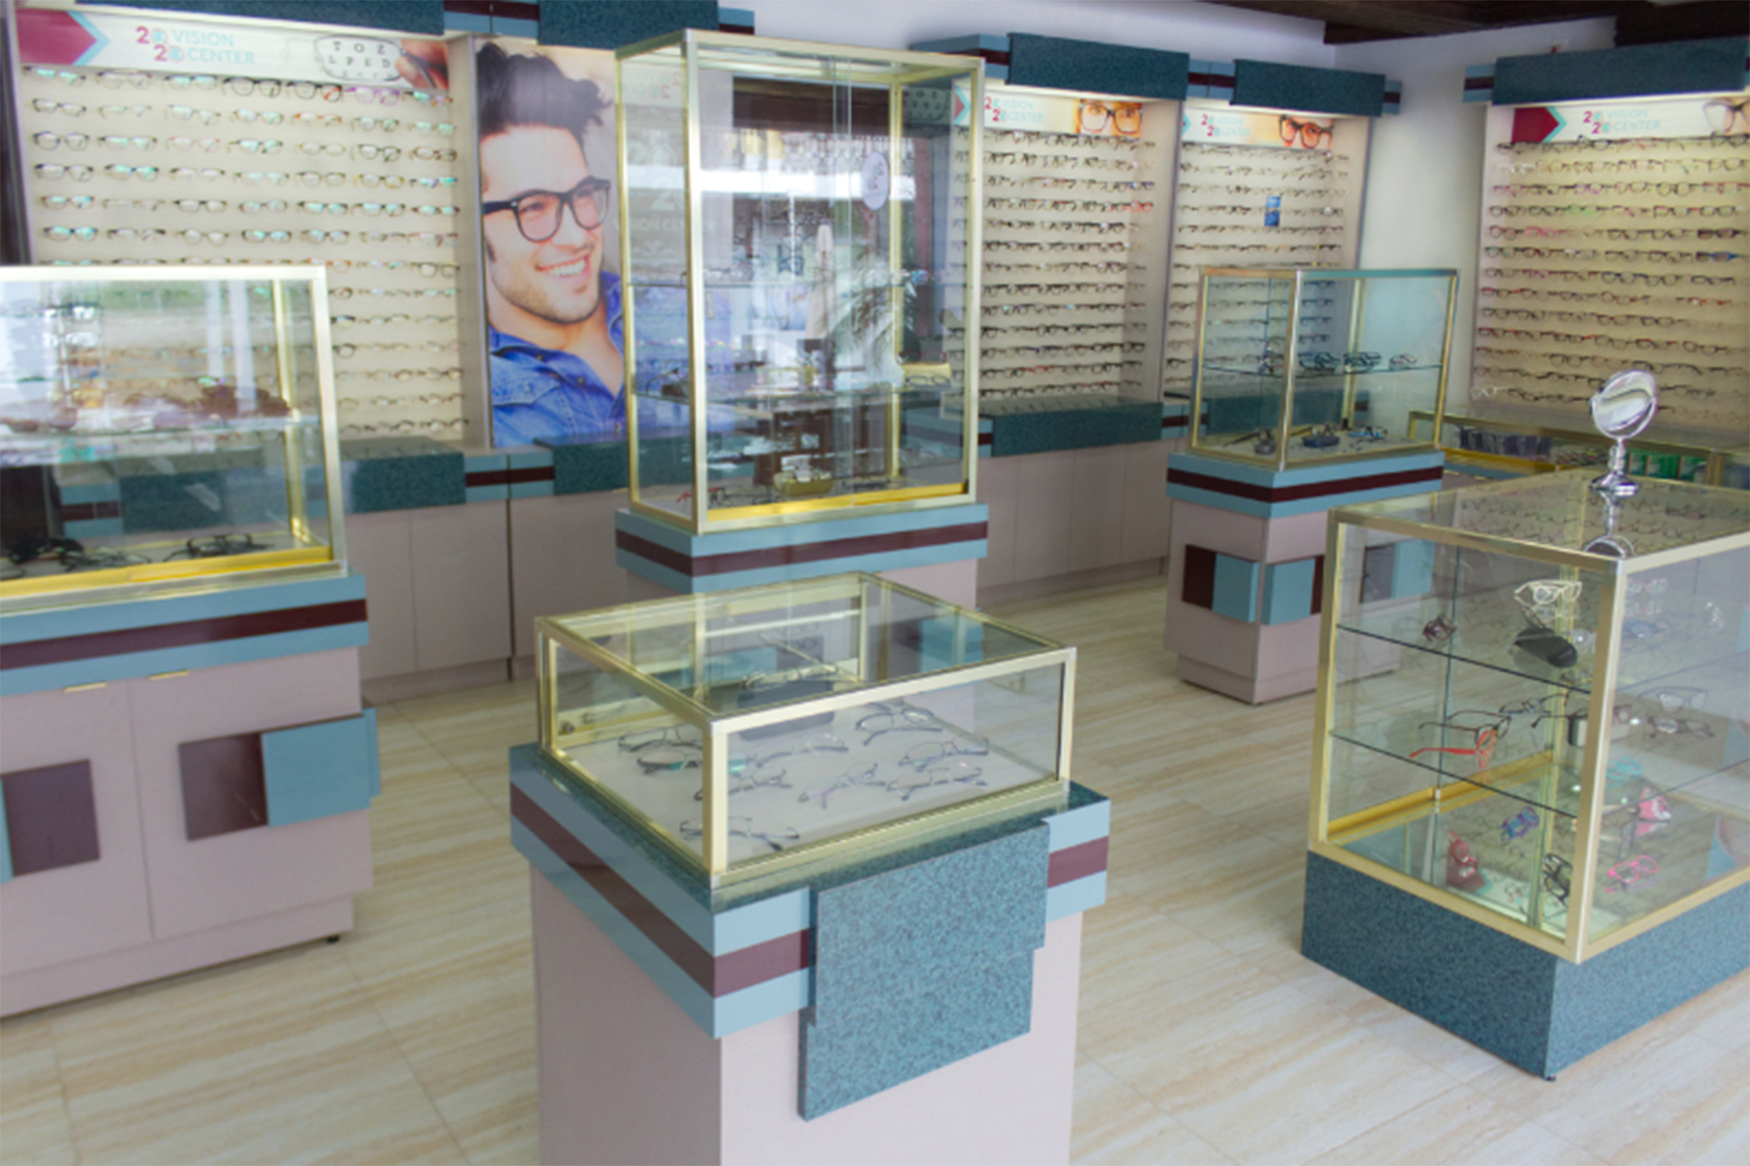 Images from Vision Center in MediPlaza